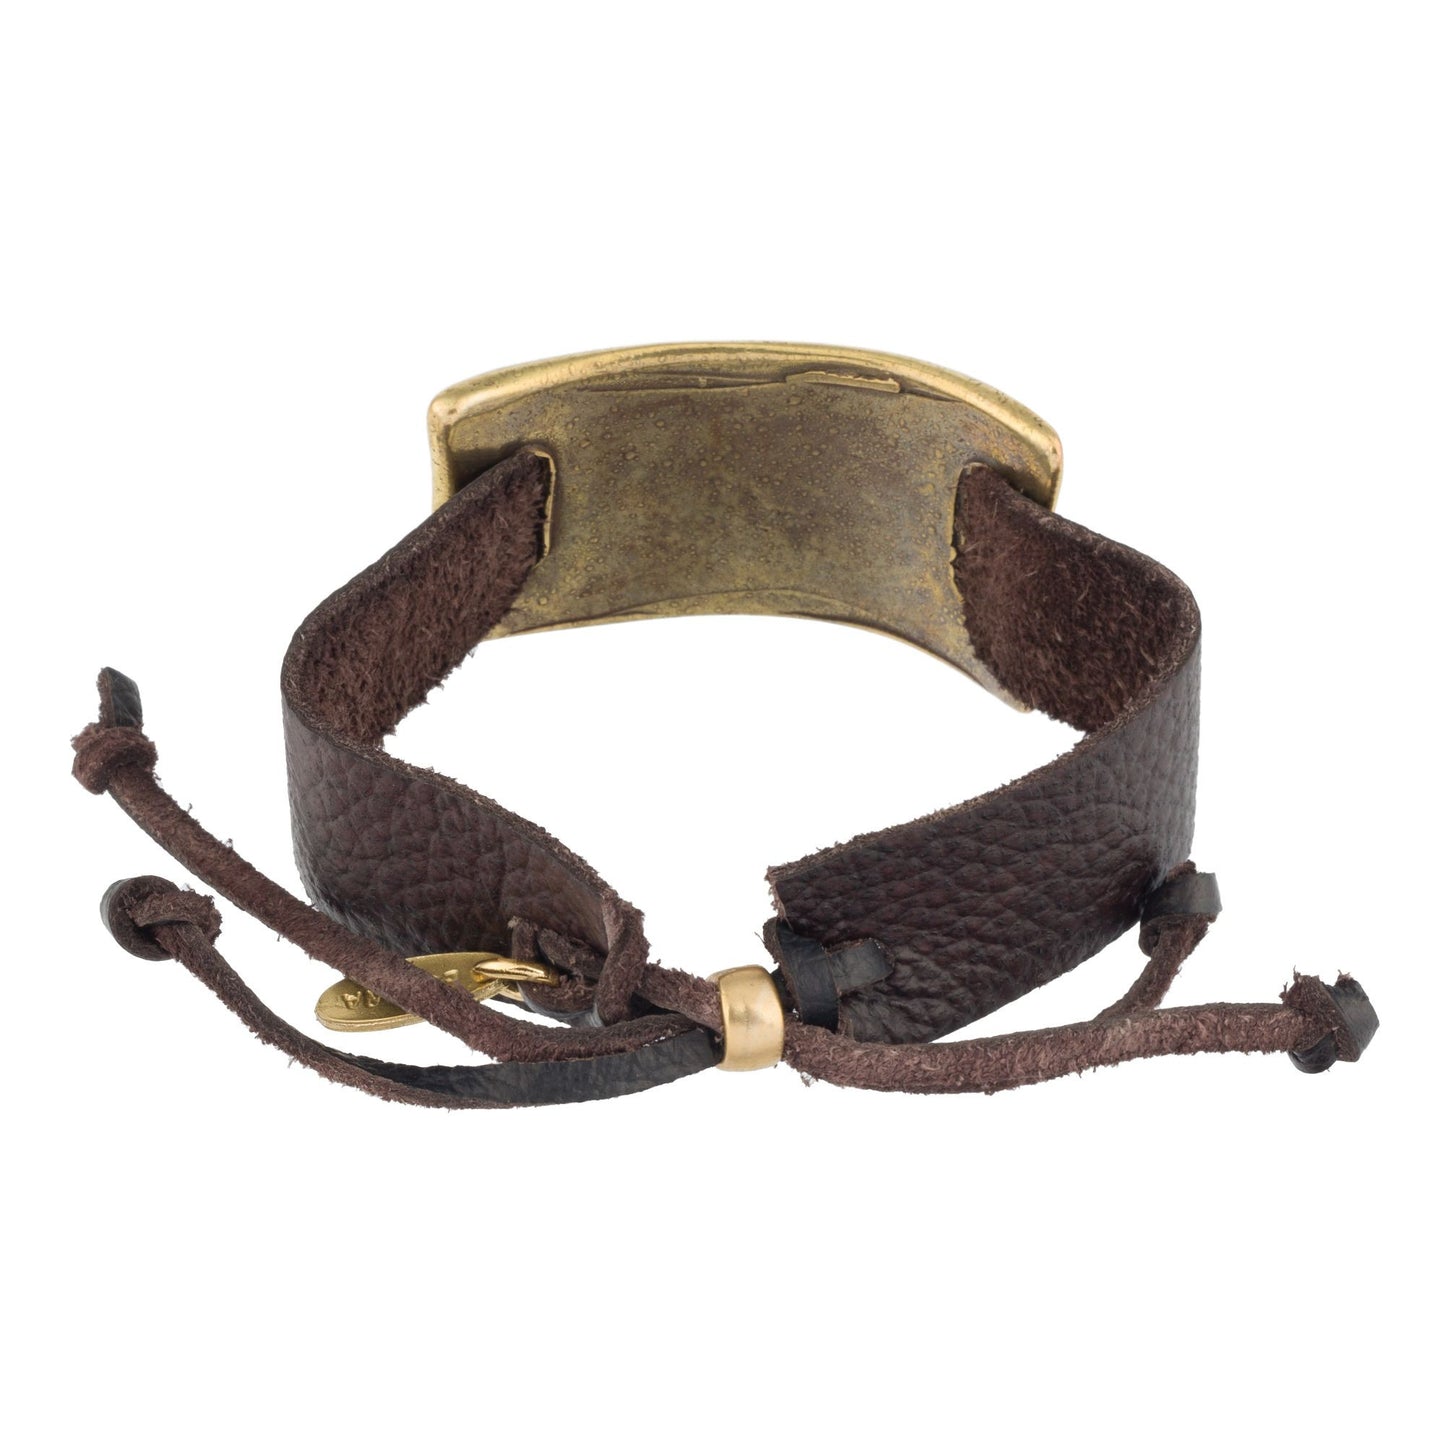 Leather and golden zamak bracelet "Pass" brown leather